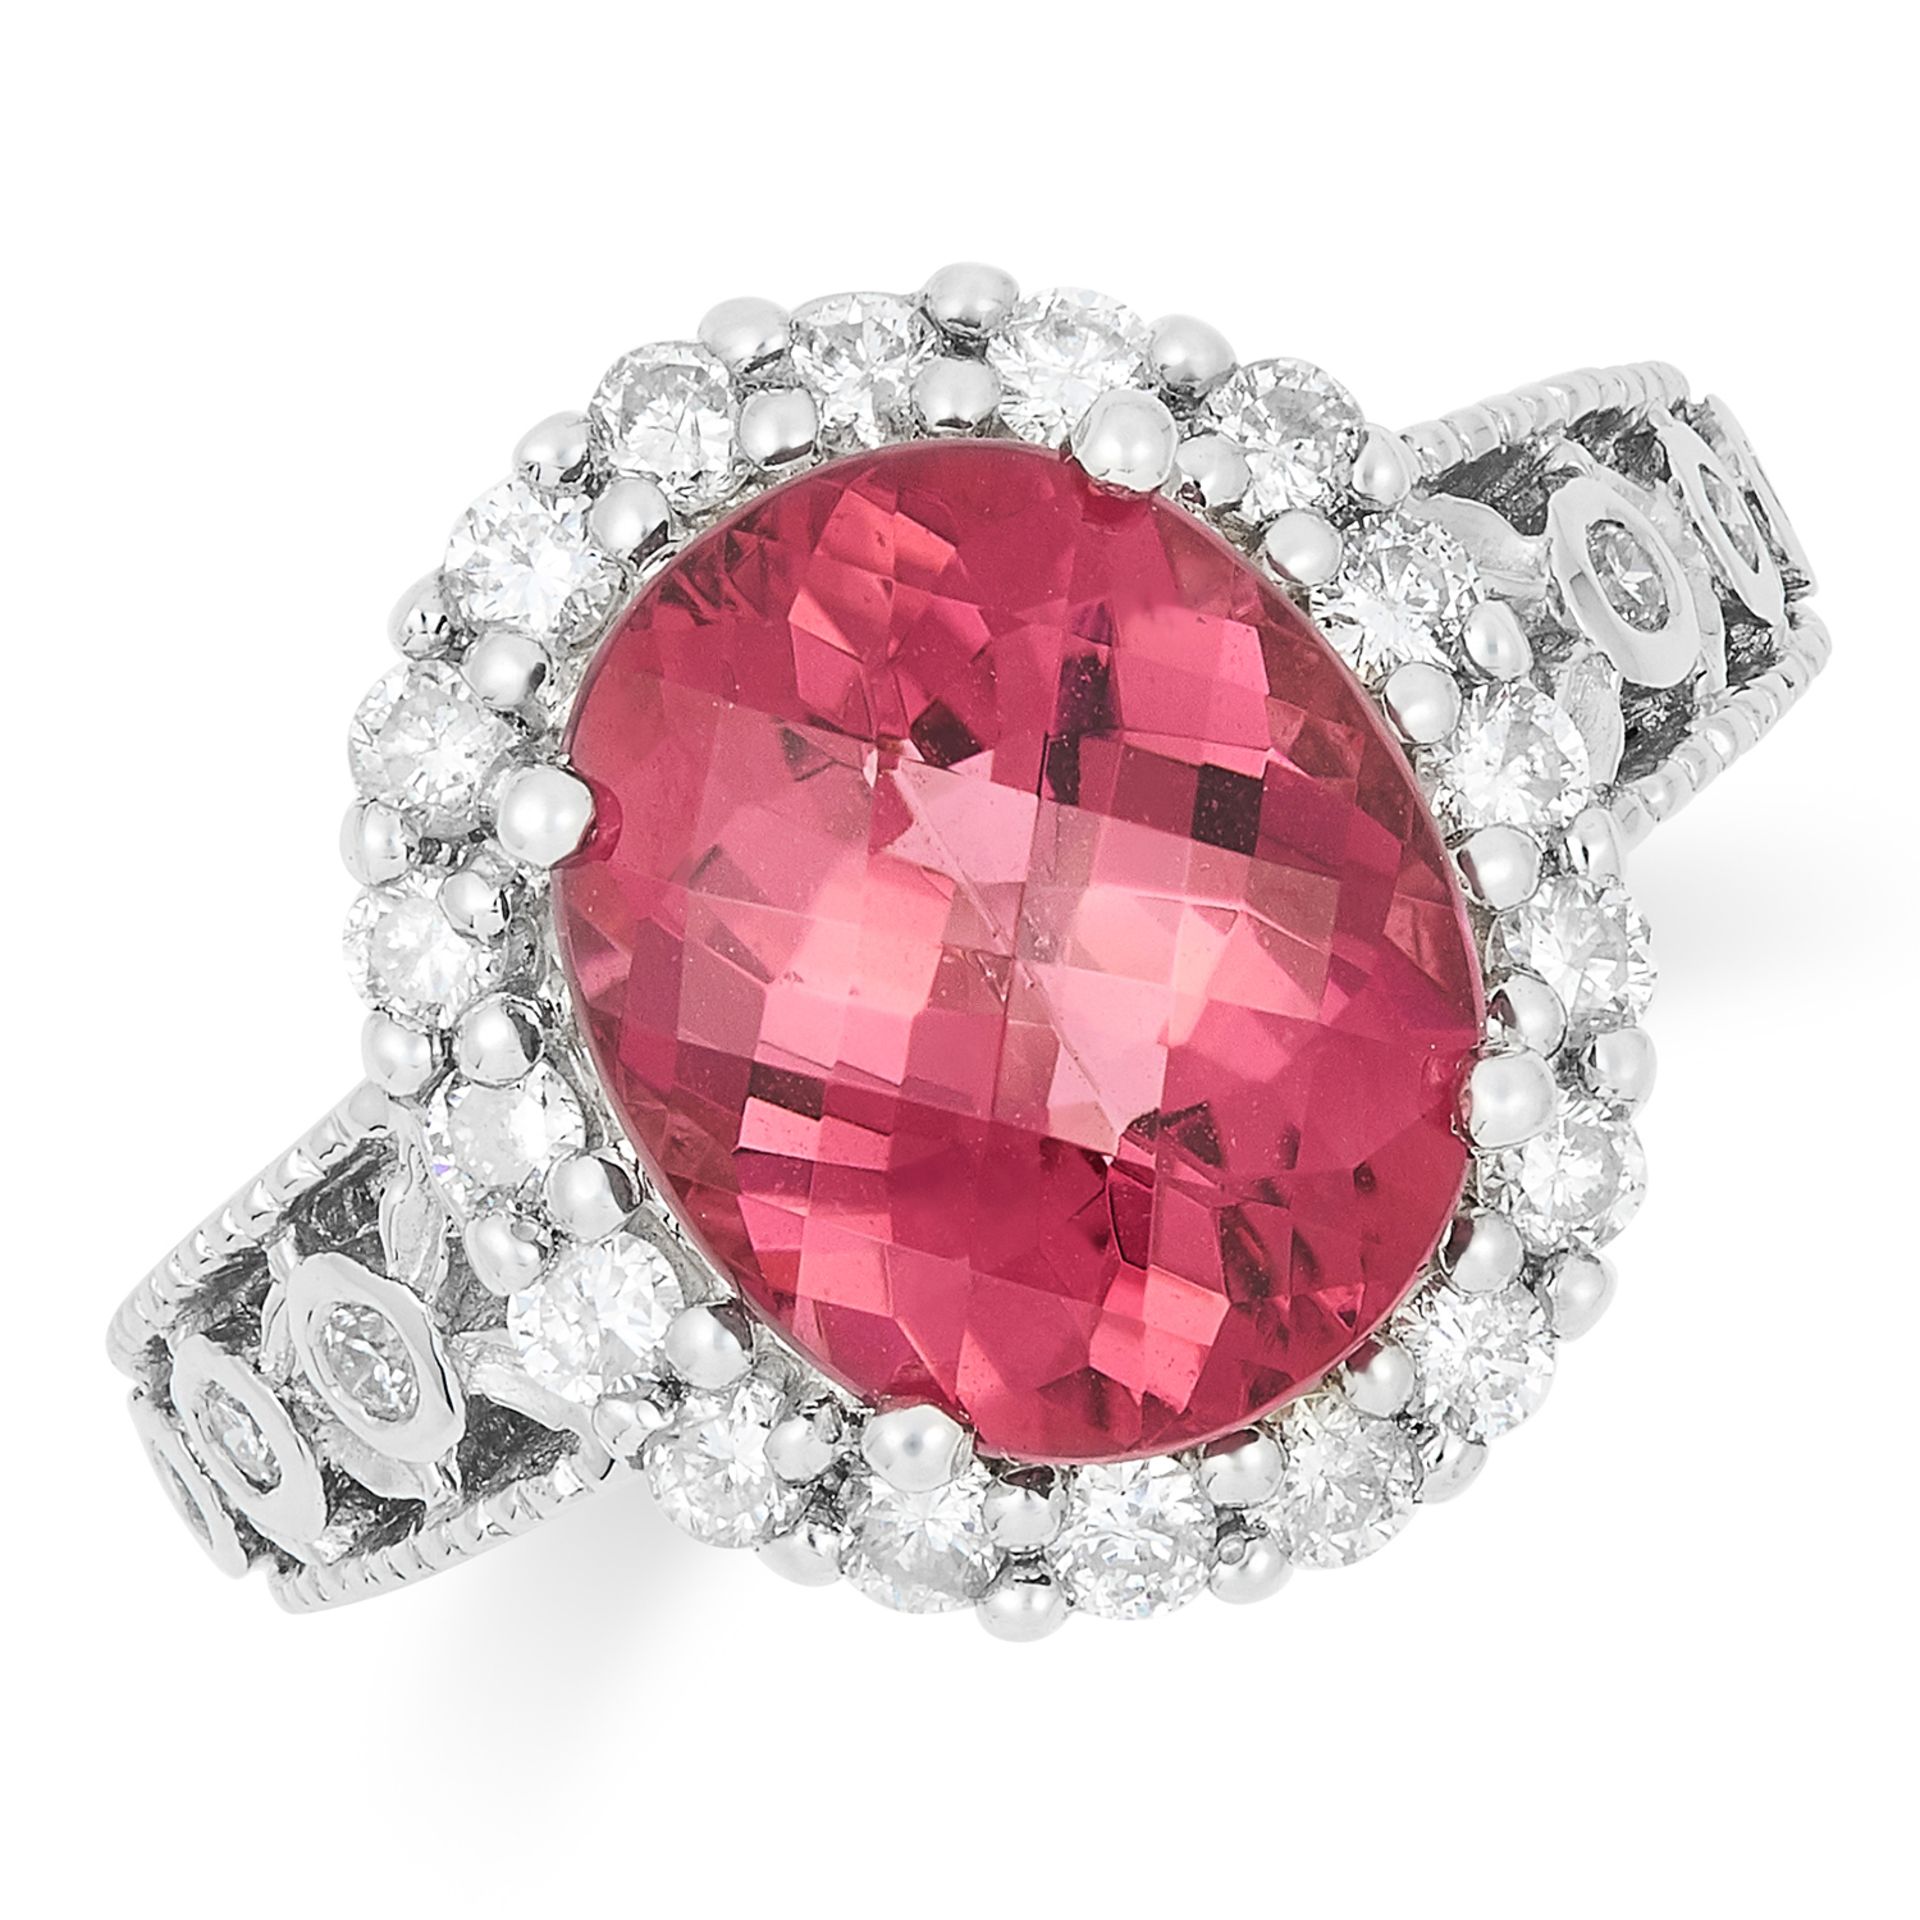 PINK TOURMALINE AND DIAMOND DRESS RING, set with a faceted oval cut tourmaline and round cut